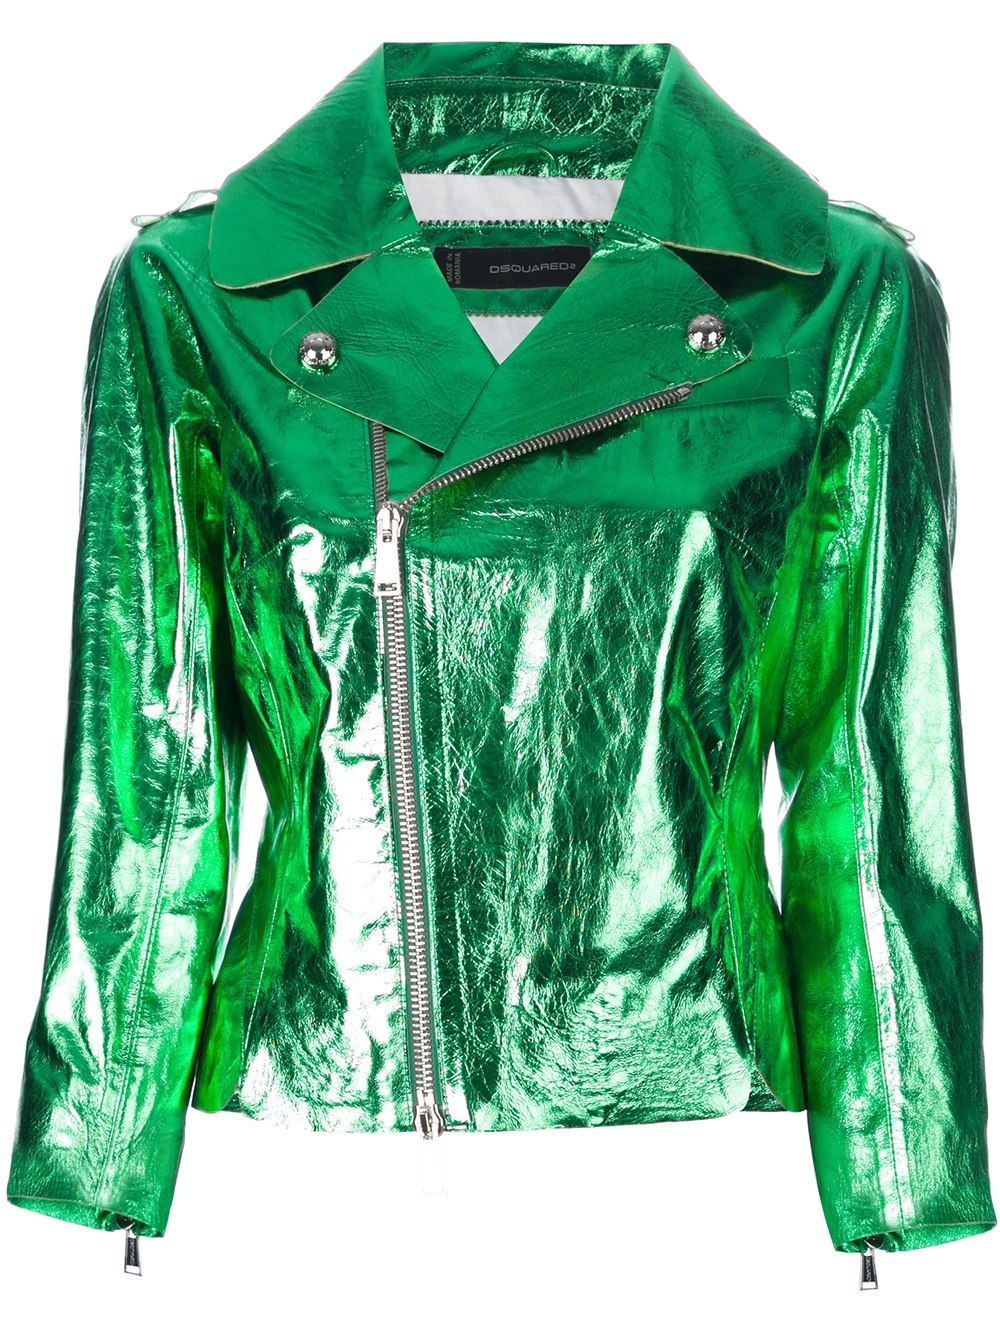 Lyst - DSquared² Metallic Leather Jacket in Green